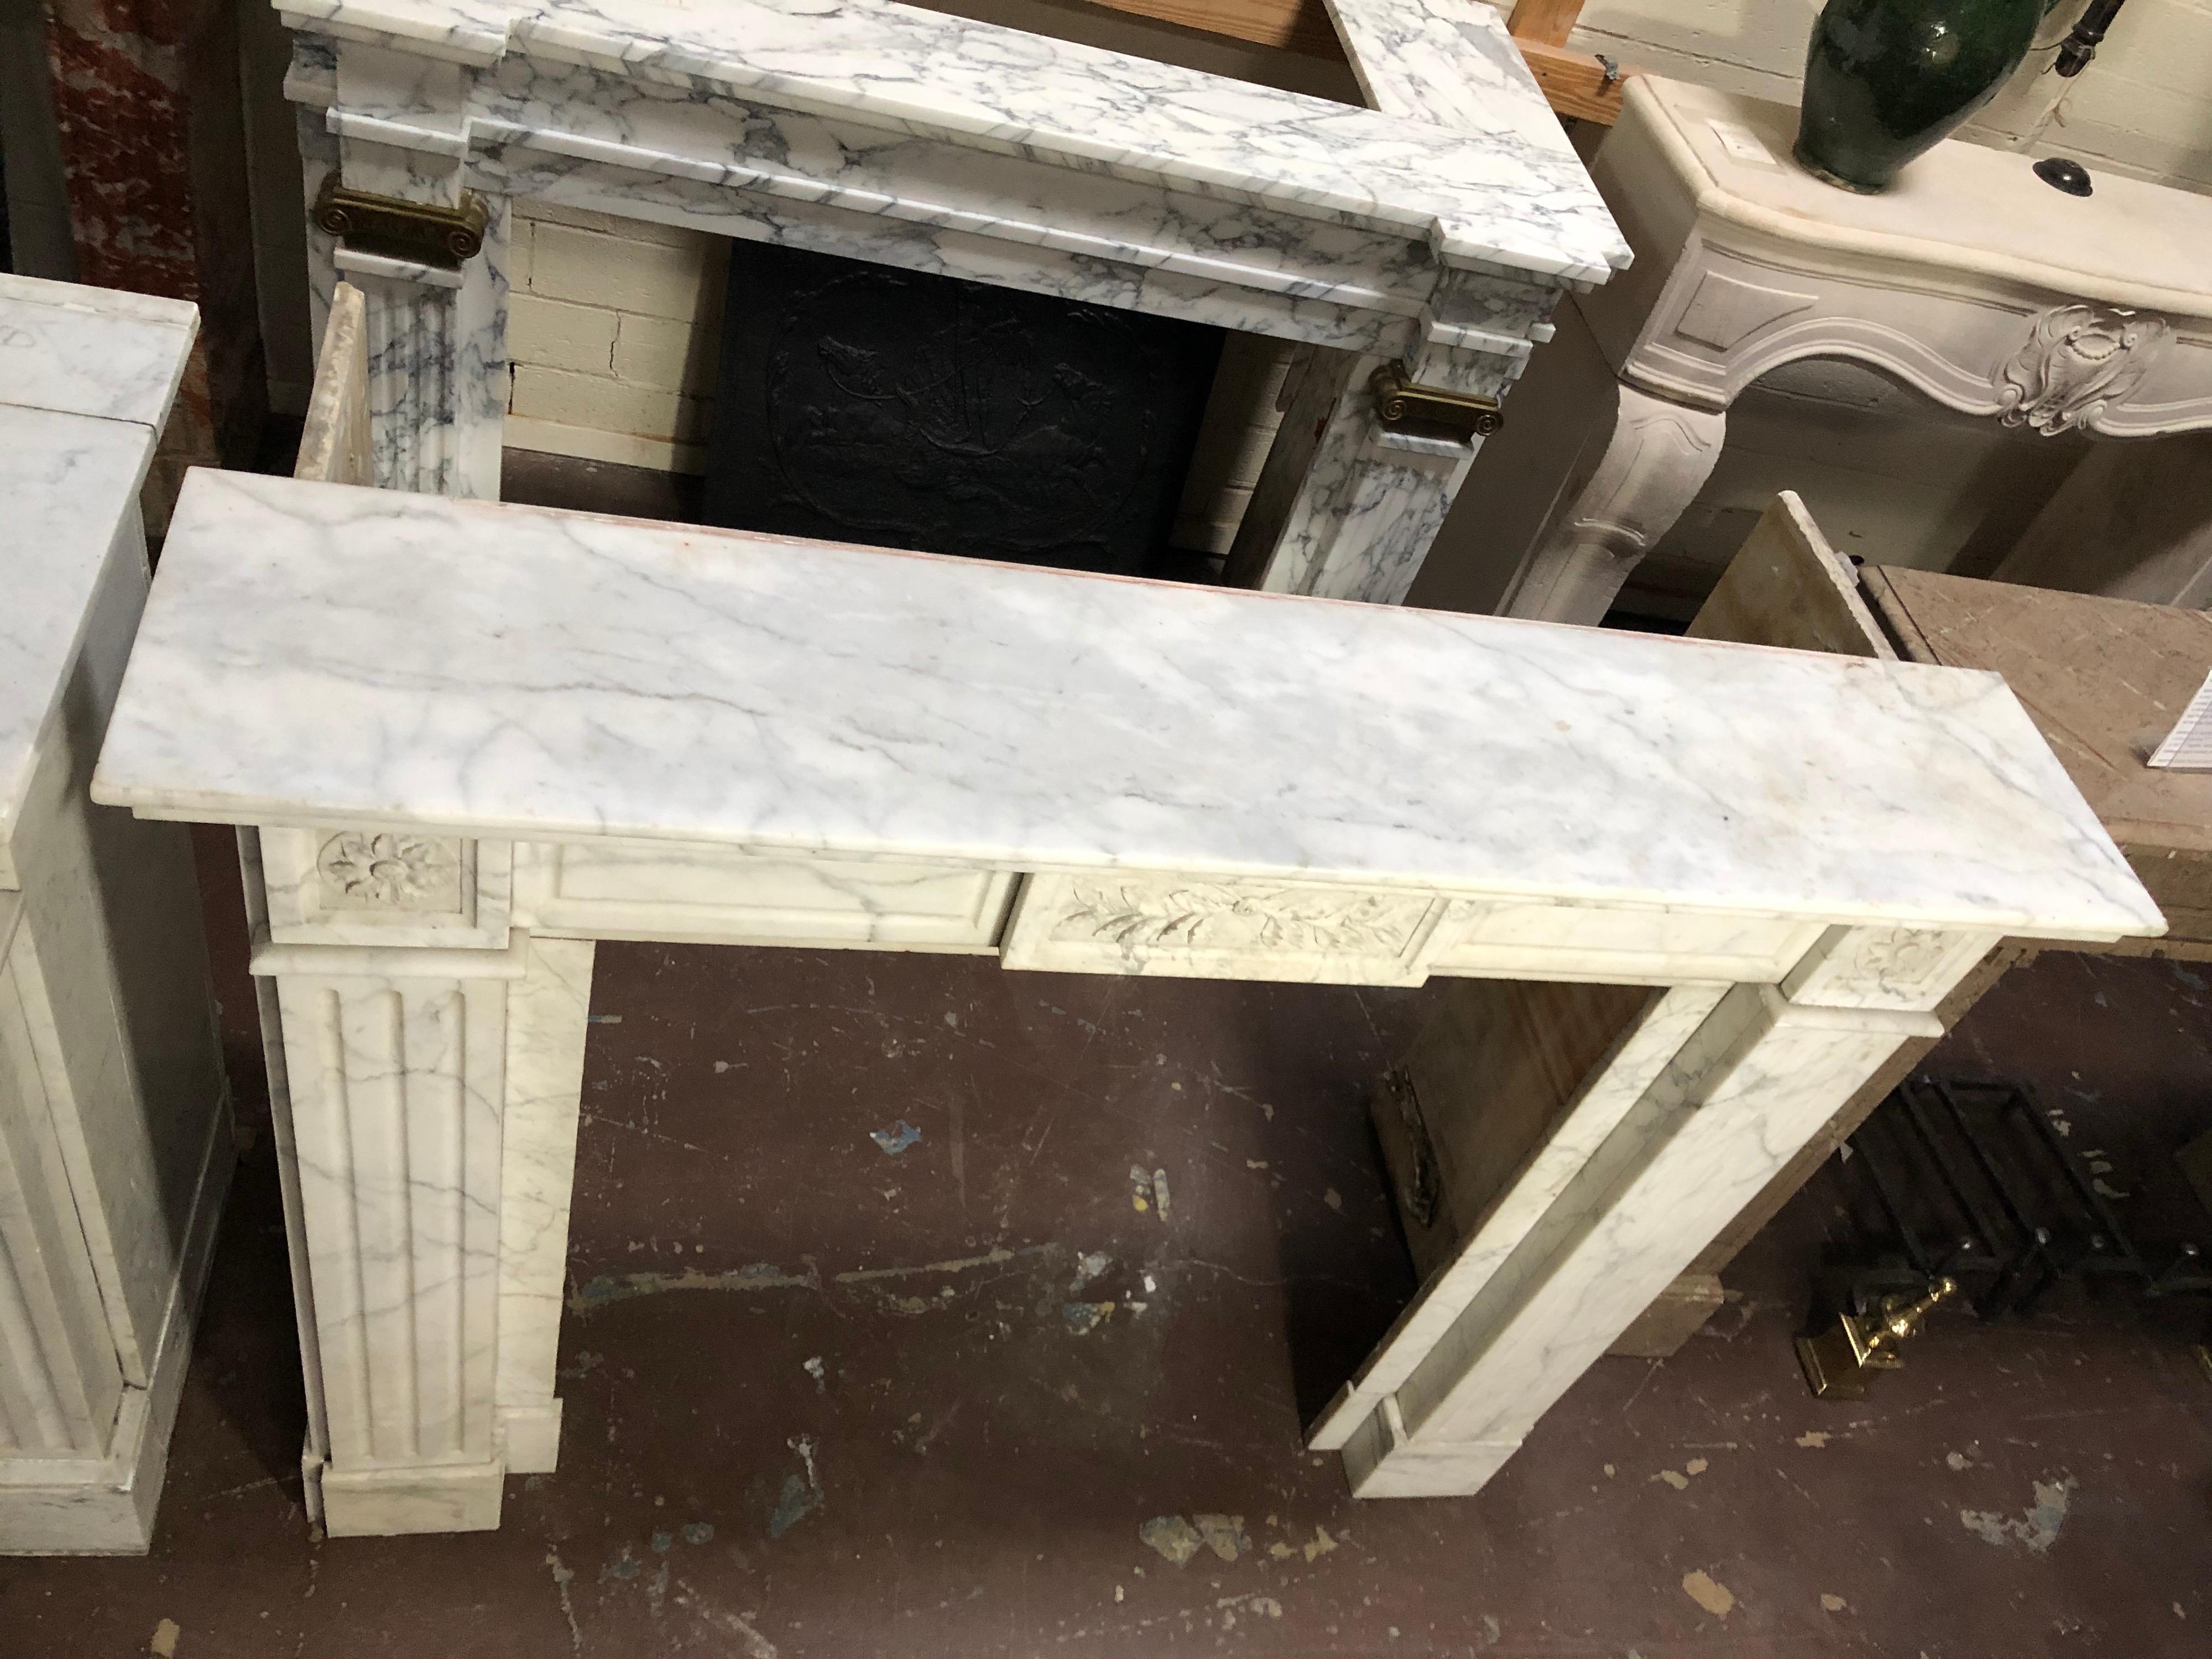 19th Century Marble Fireplace from France (19. Jahrhundert)